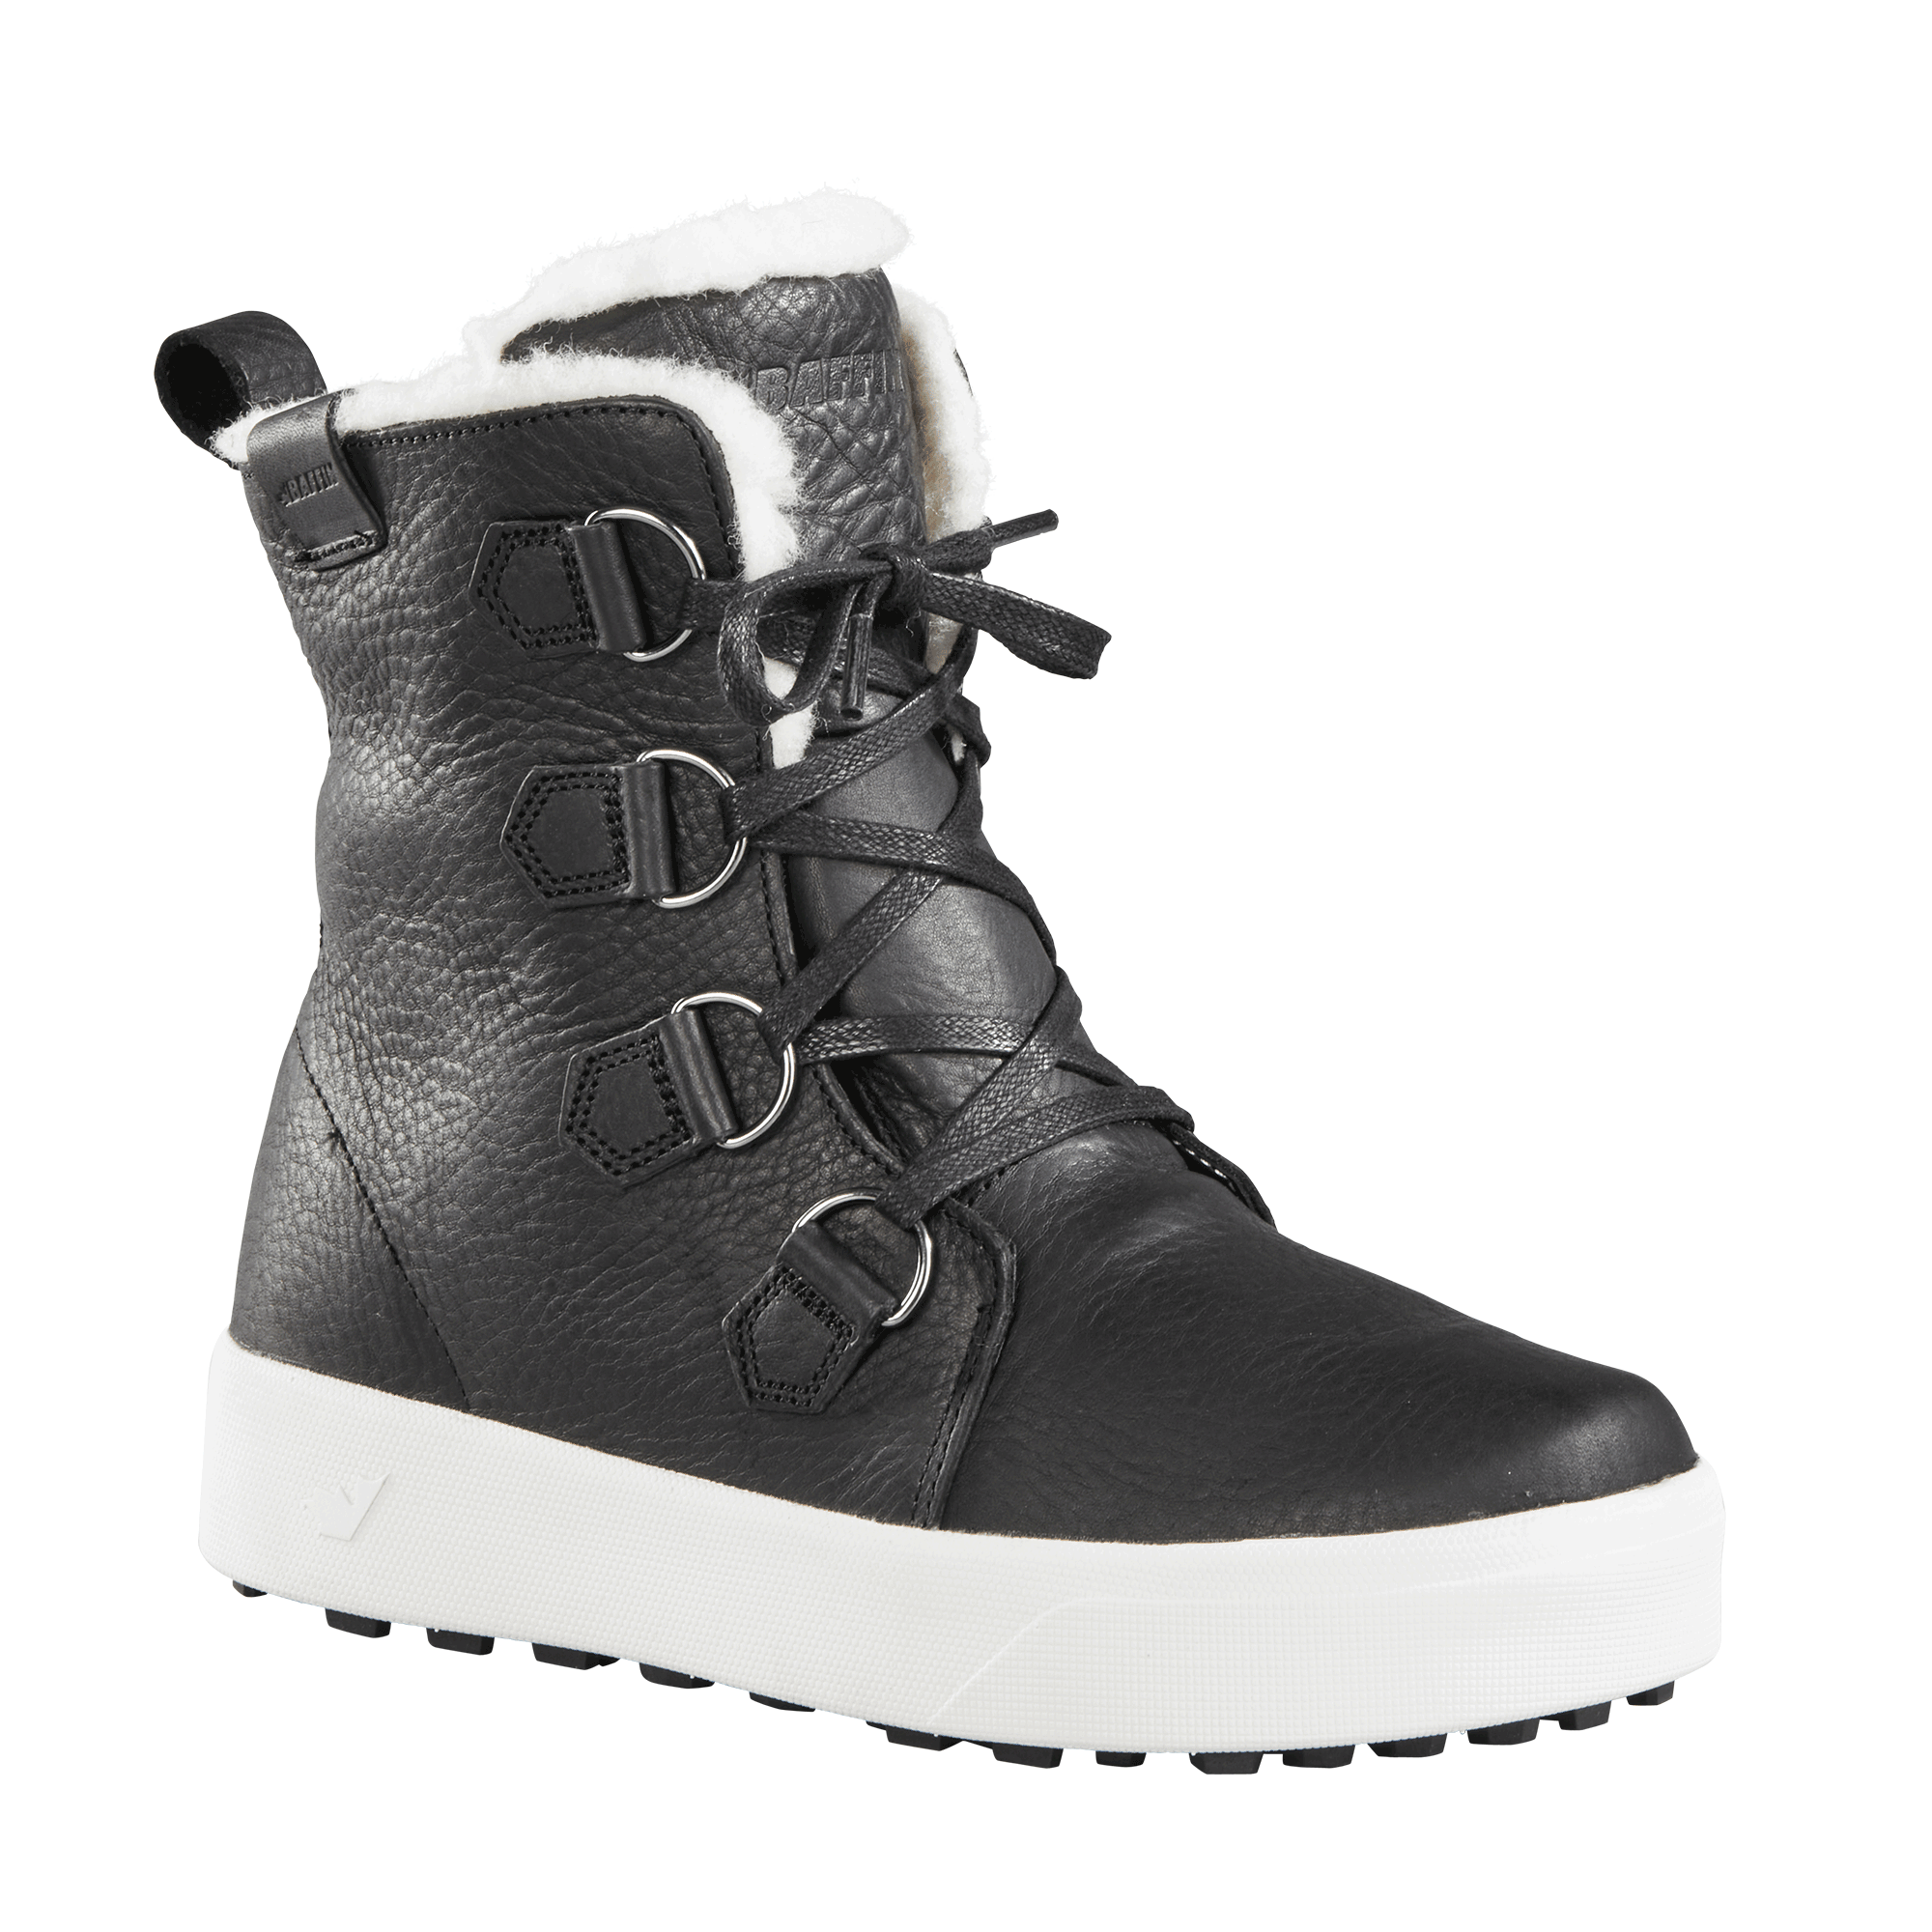 HIGH PARK | Women's Boot – Baffin - Born in the North '79